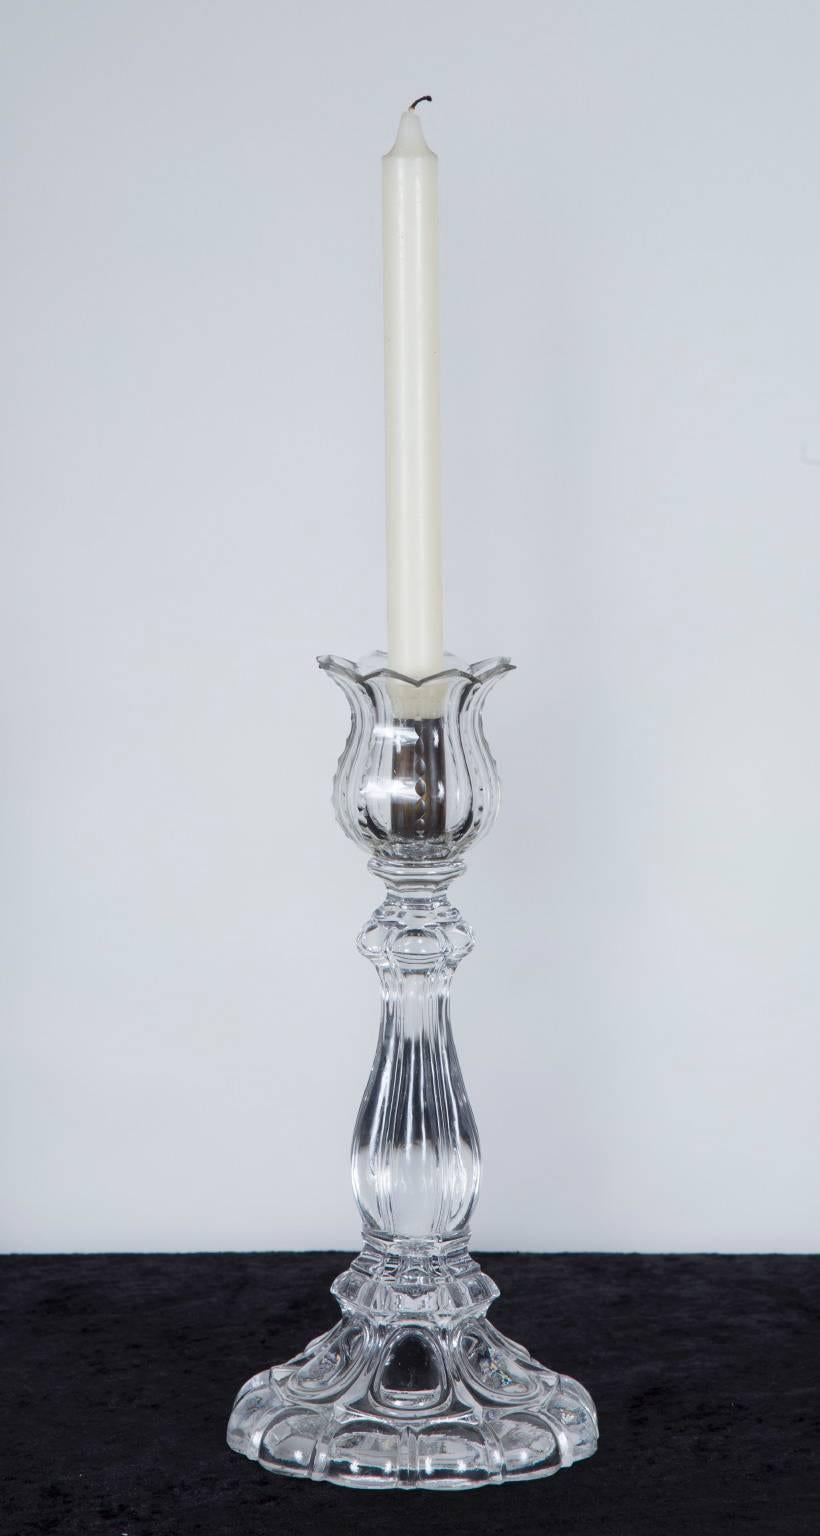 This pair of crystal candlesticks are made of beautiful St. Louis crystal, with a mark on the bottom. The top of each candlestick is shaped resembling a tulip. A beautiful addition to any tabletop, watch the crystal sparkle in the candlelight in